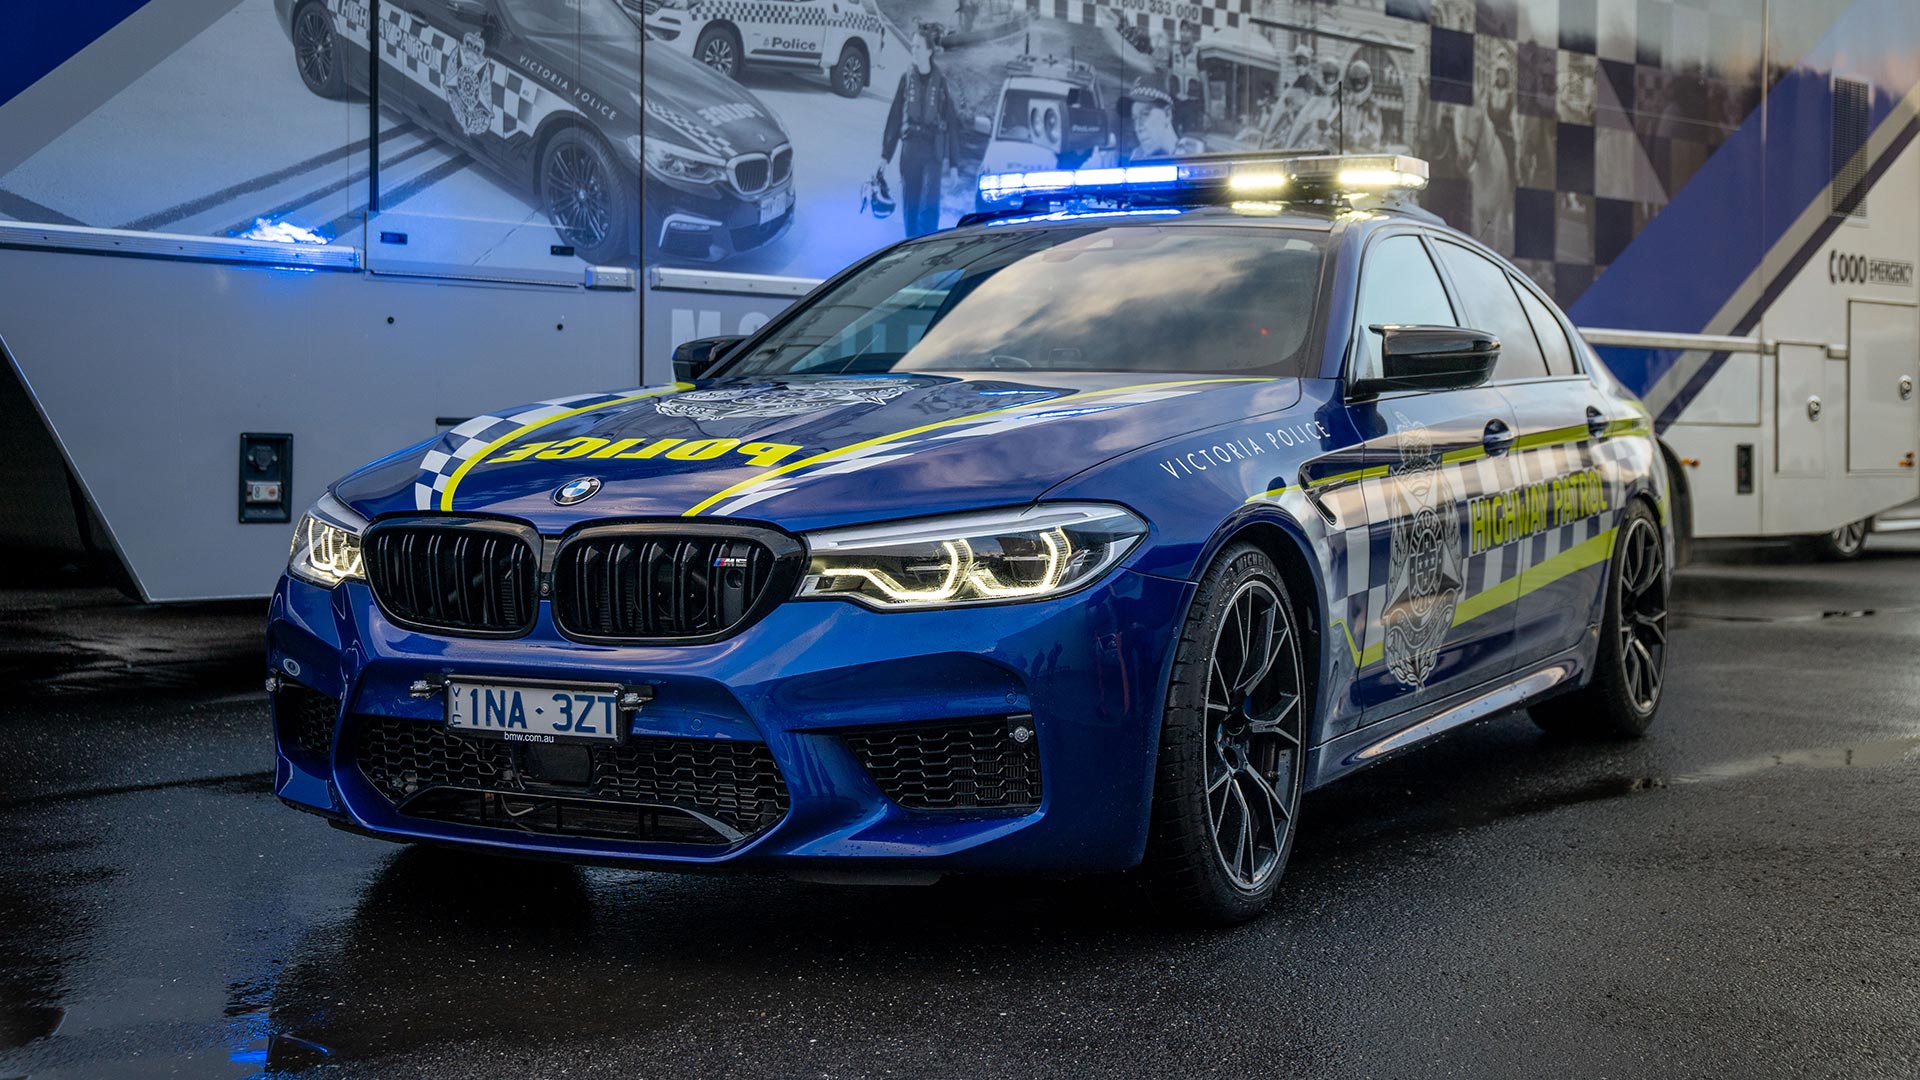 Victoria Police BMW M5 Competition